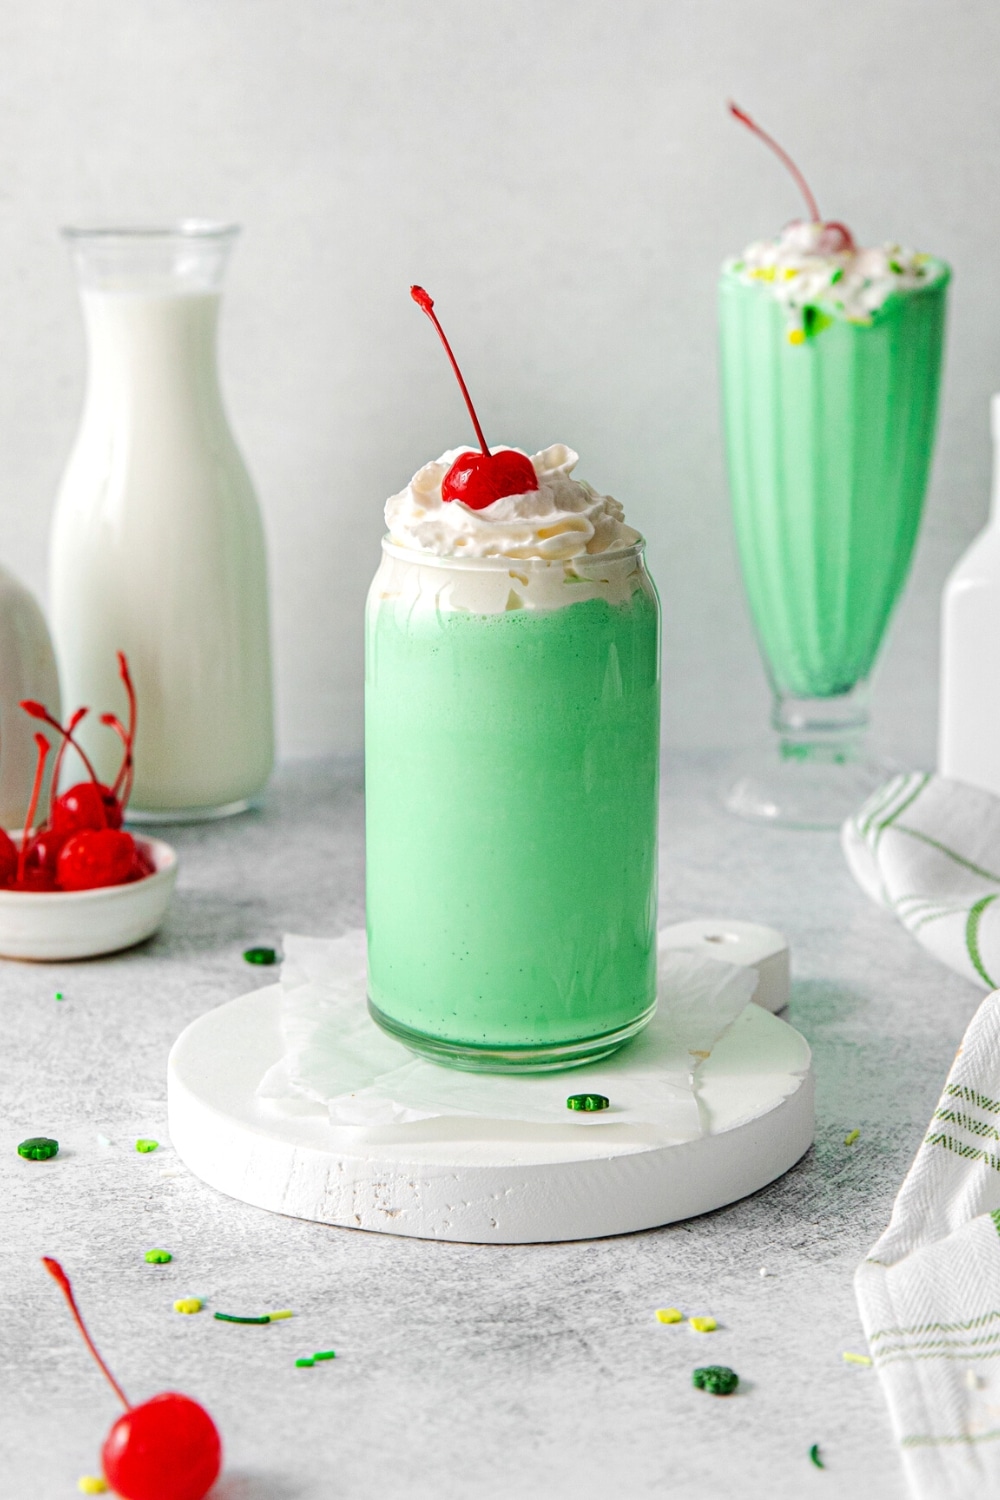 A copycat McDonald's shamrock shake garnished with whipped cream and maraschino cherry, with an additional shake in the background.